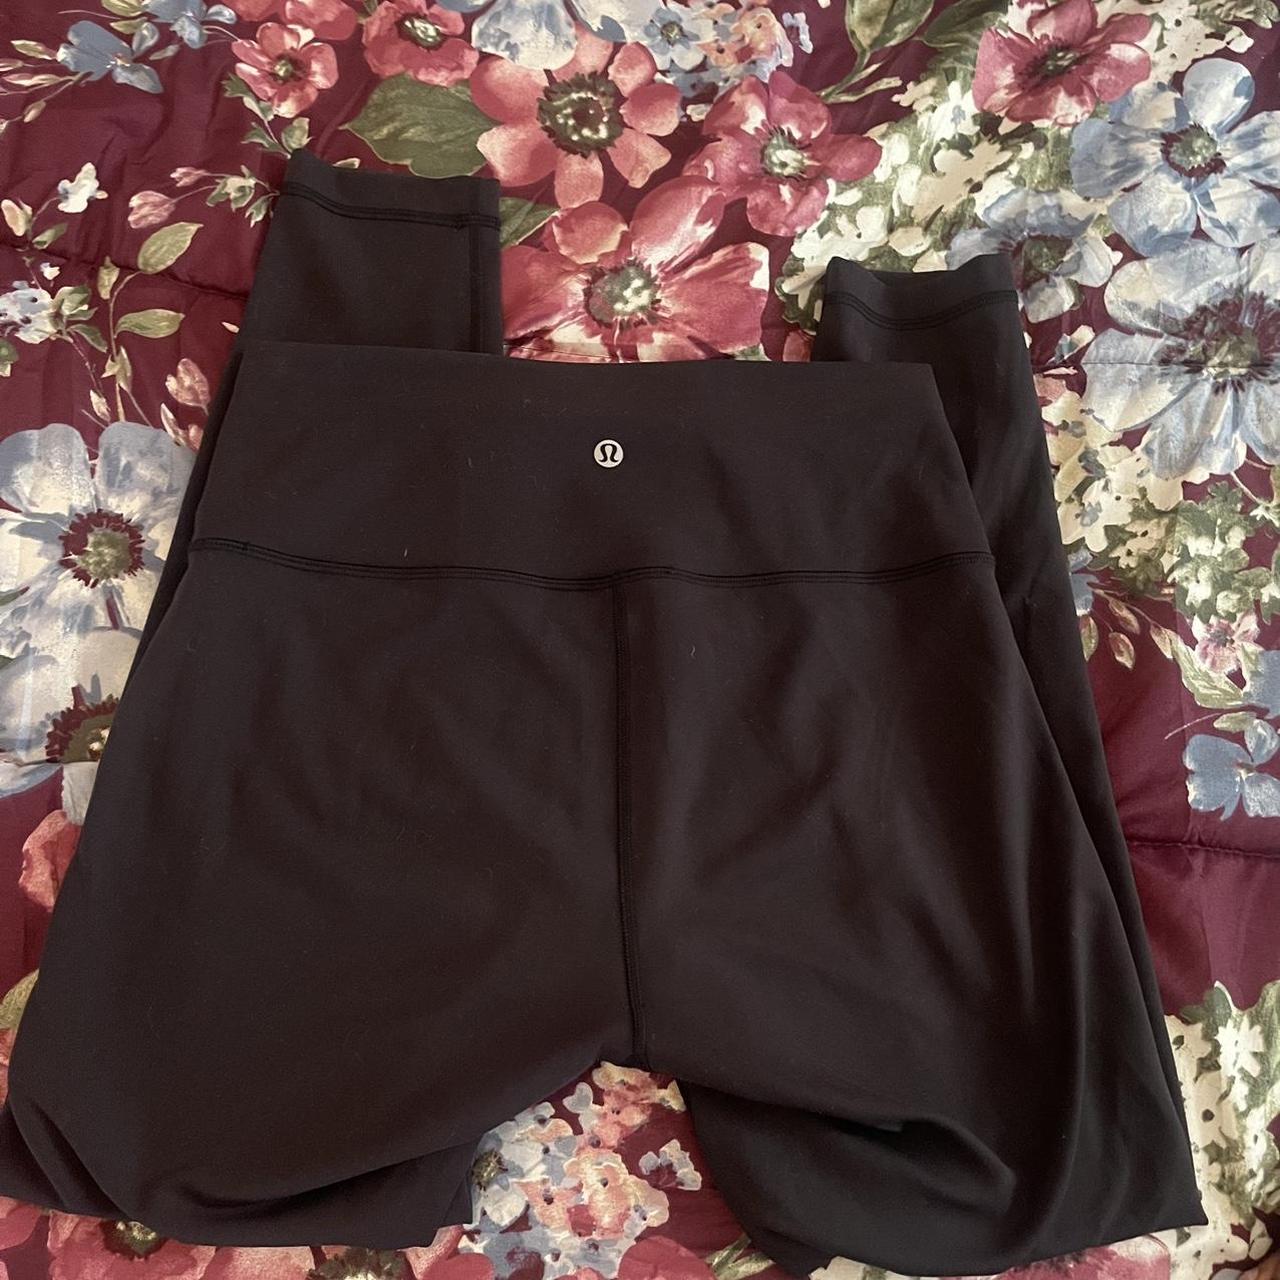 lululemon wunder train size 8 WANT TO TRADE FOR A - Depop